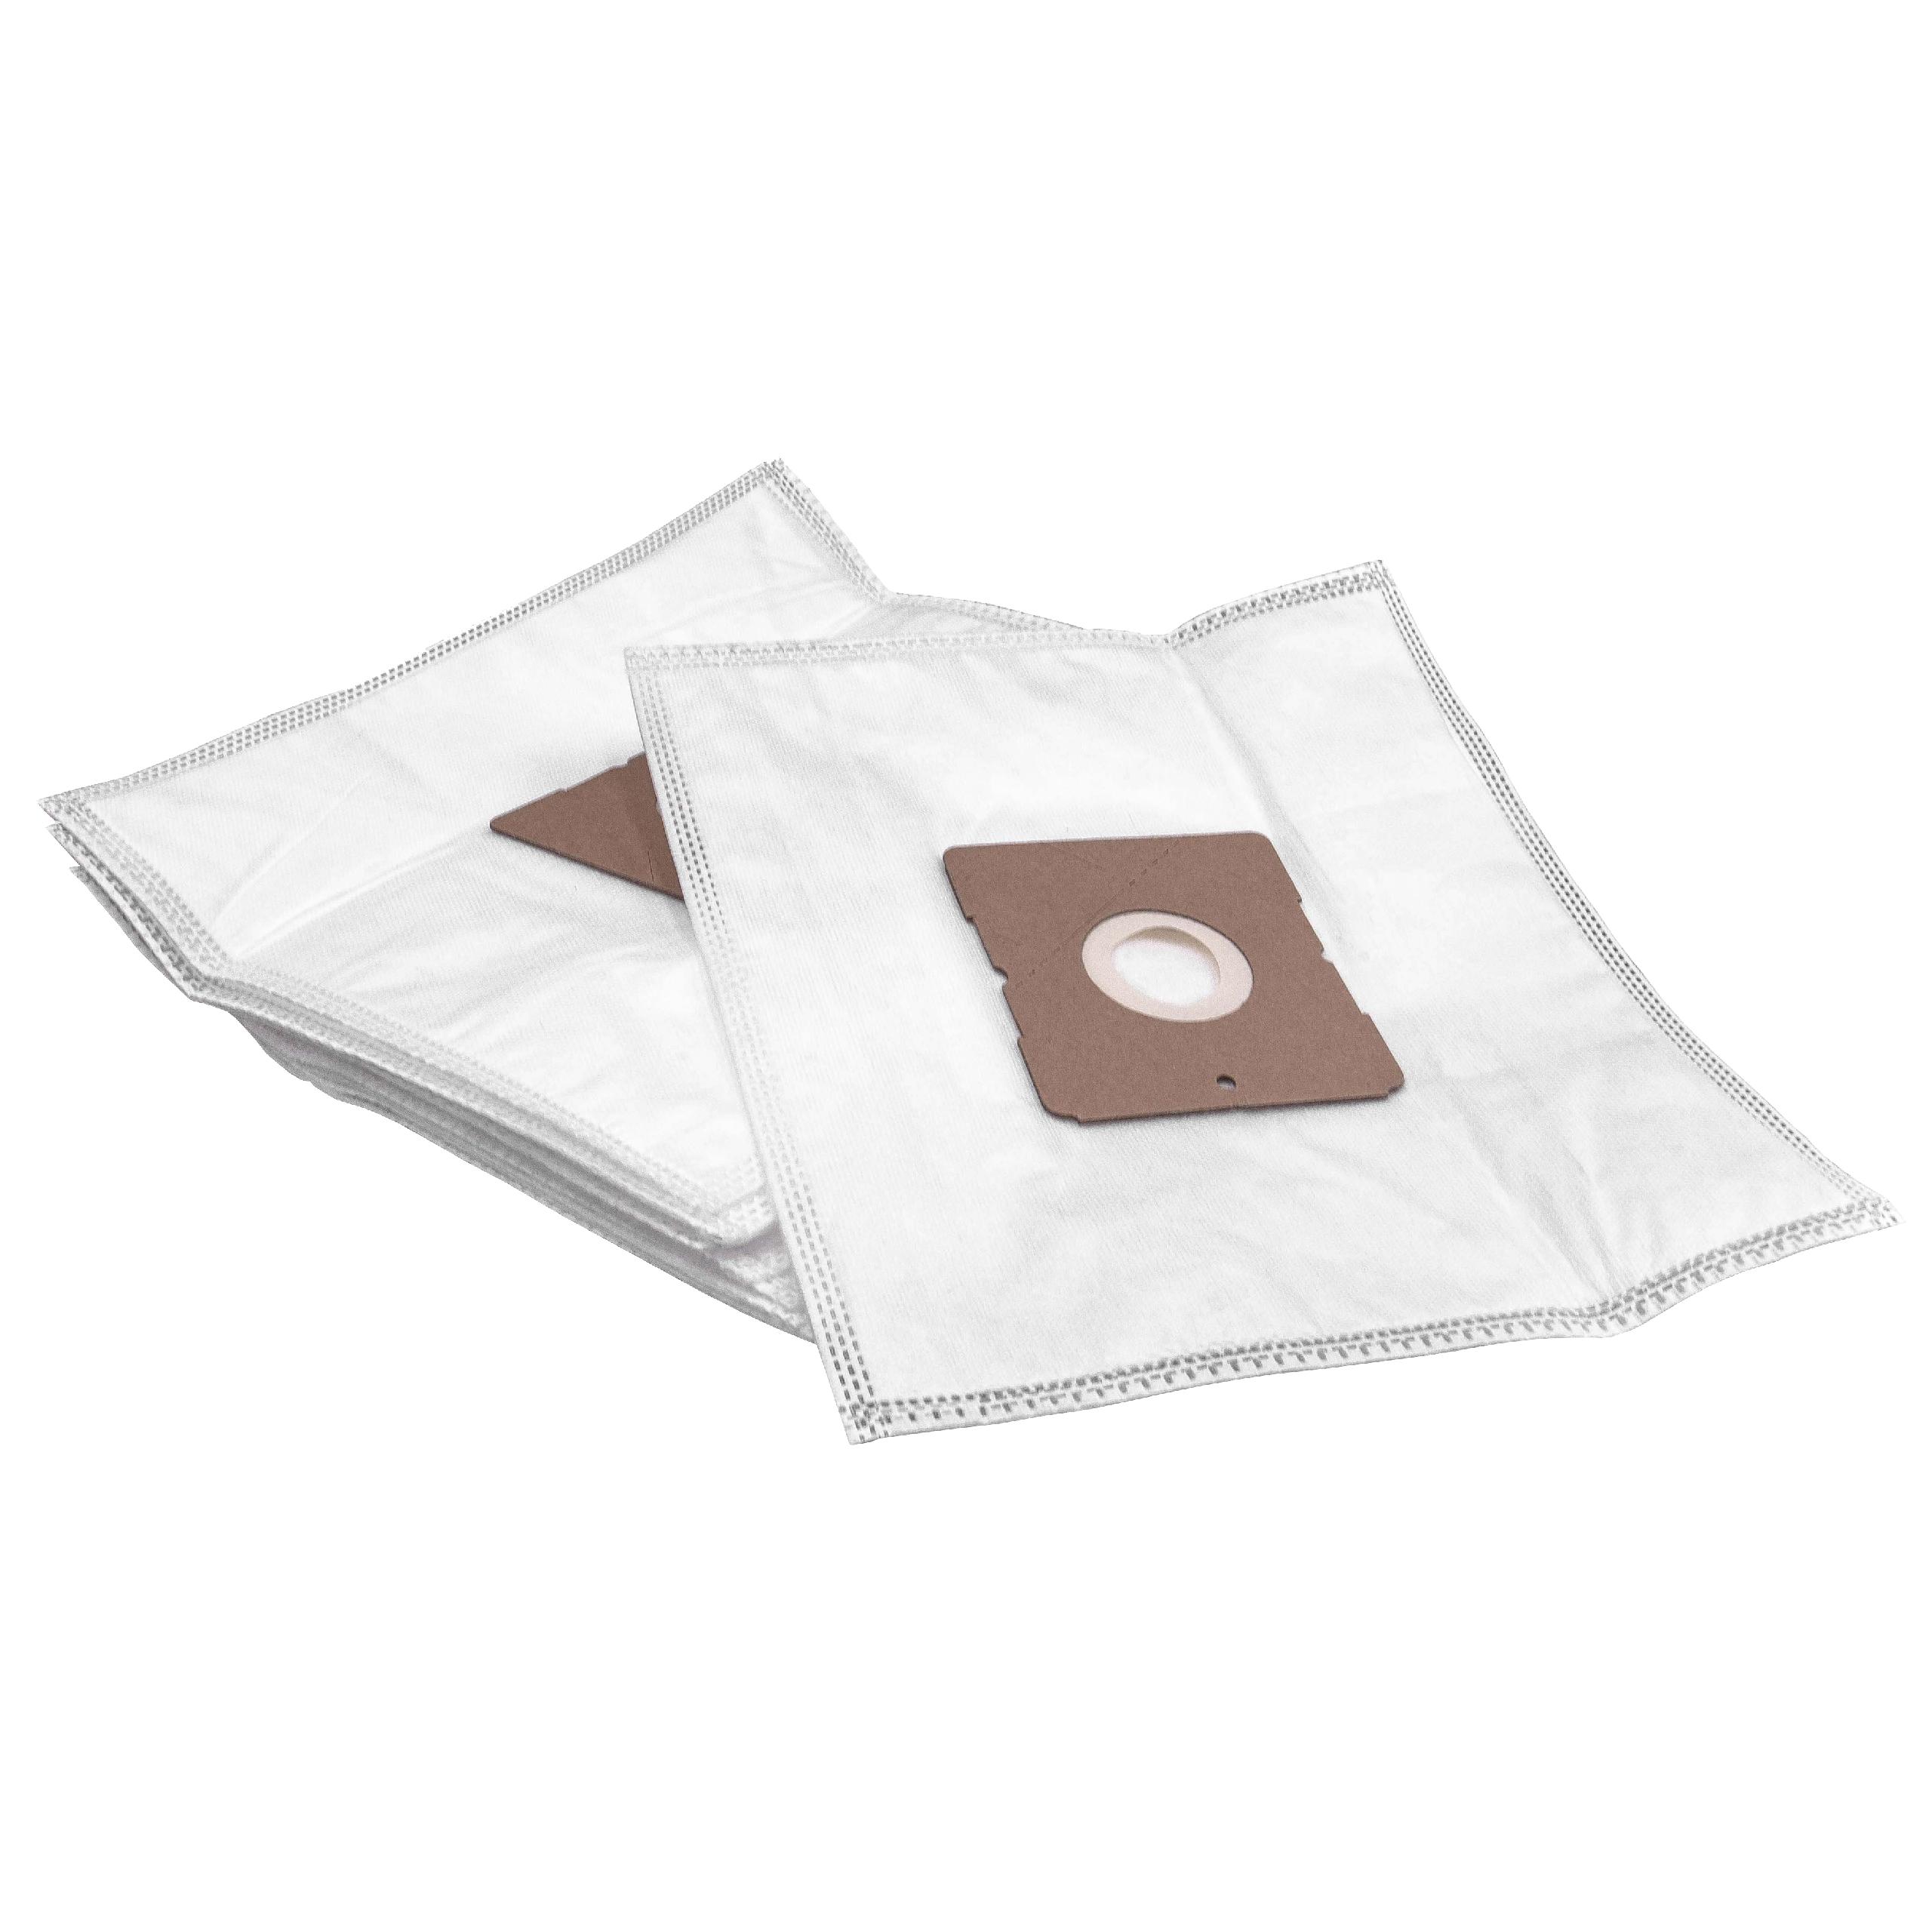 5x Vacuum Cleaner Bag replaces Severin BC7045, BC7055 for Severin - microfleece